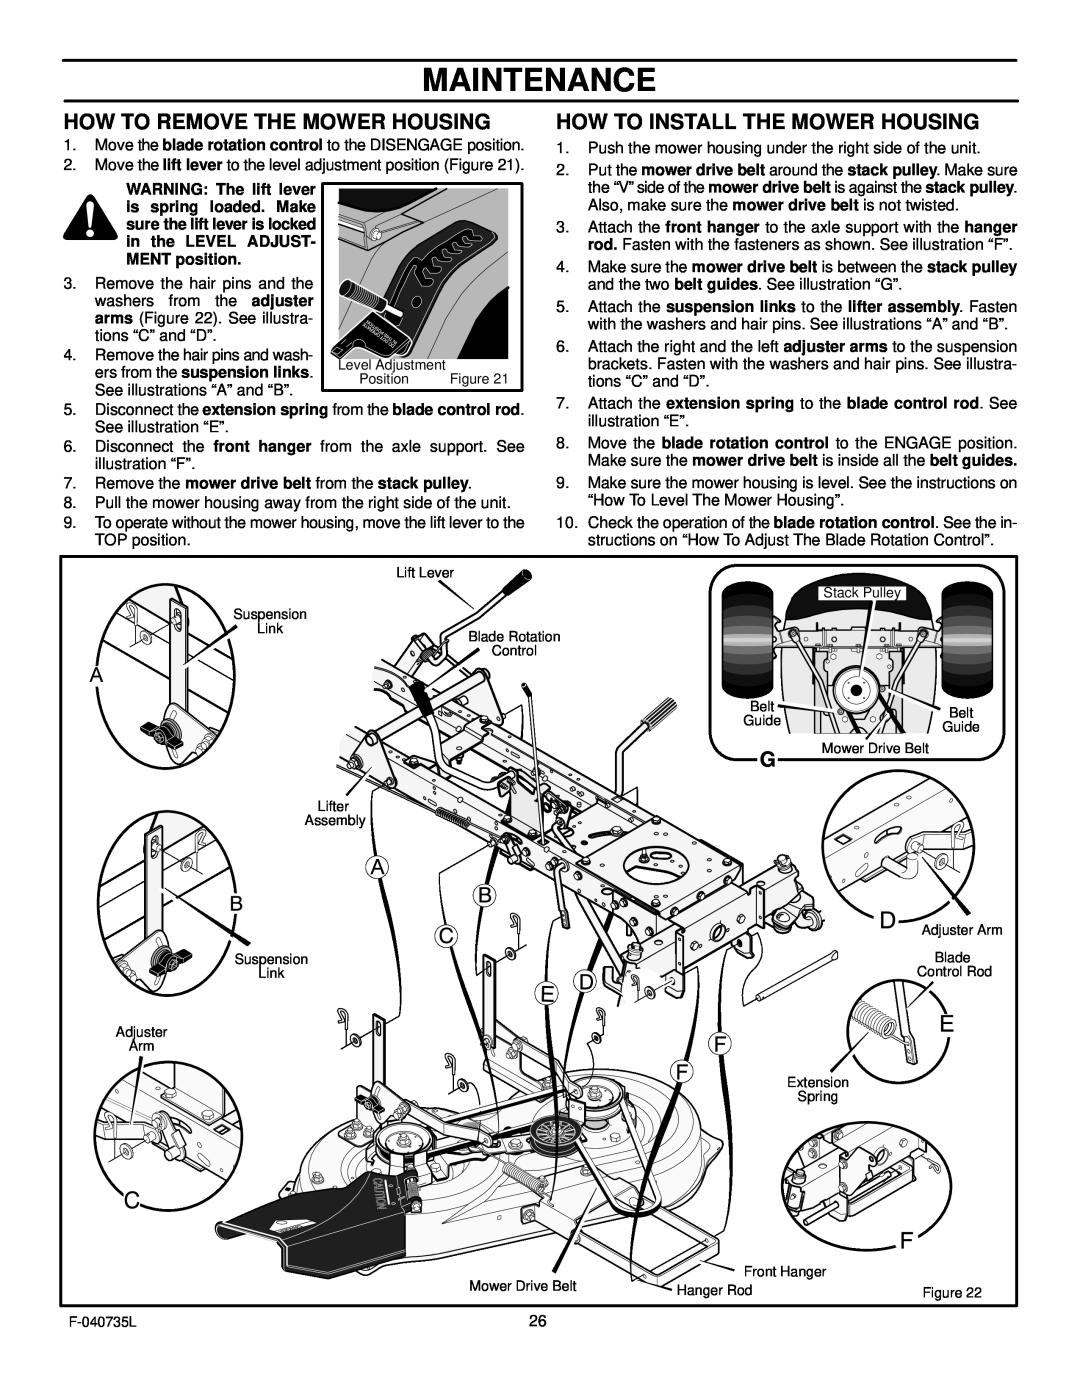 Murray 405000x8C manual Maintenance, How To Remove The Mower Housing, How To Install The Mower Housing 